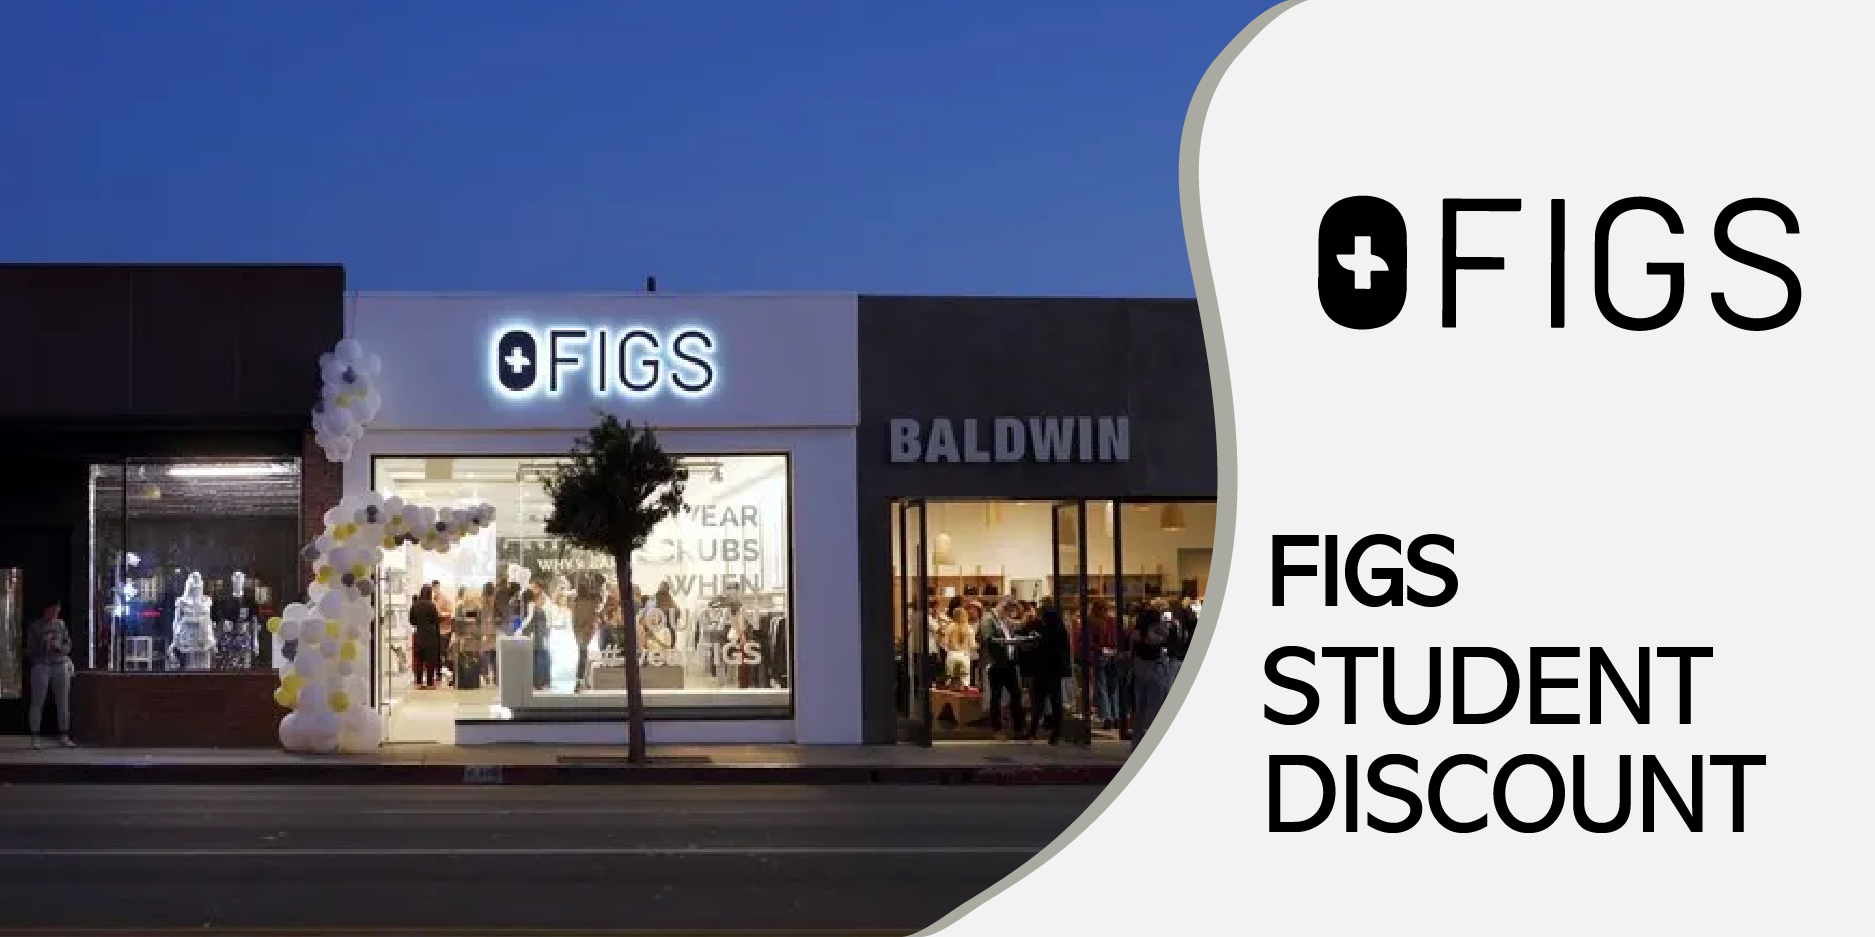 Figs Student Discount